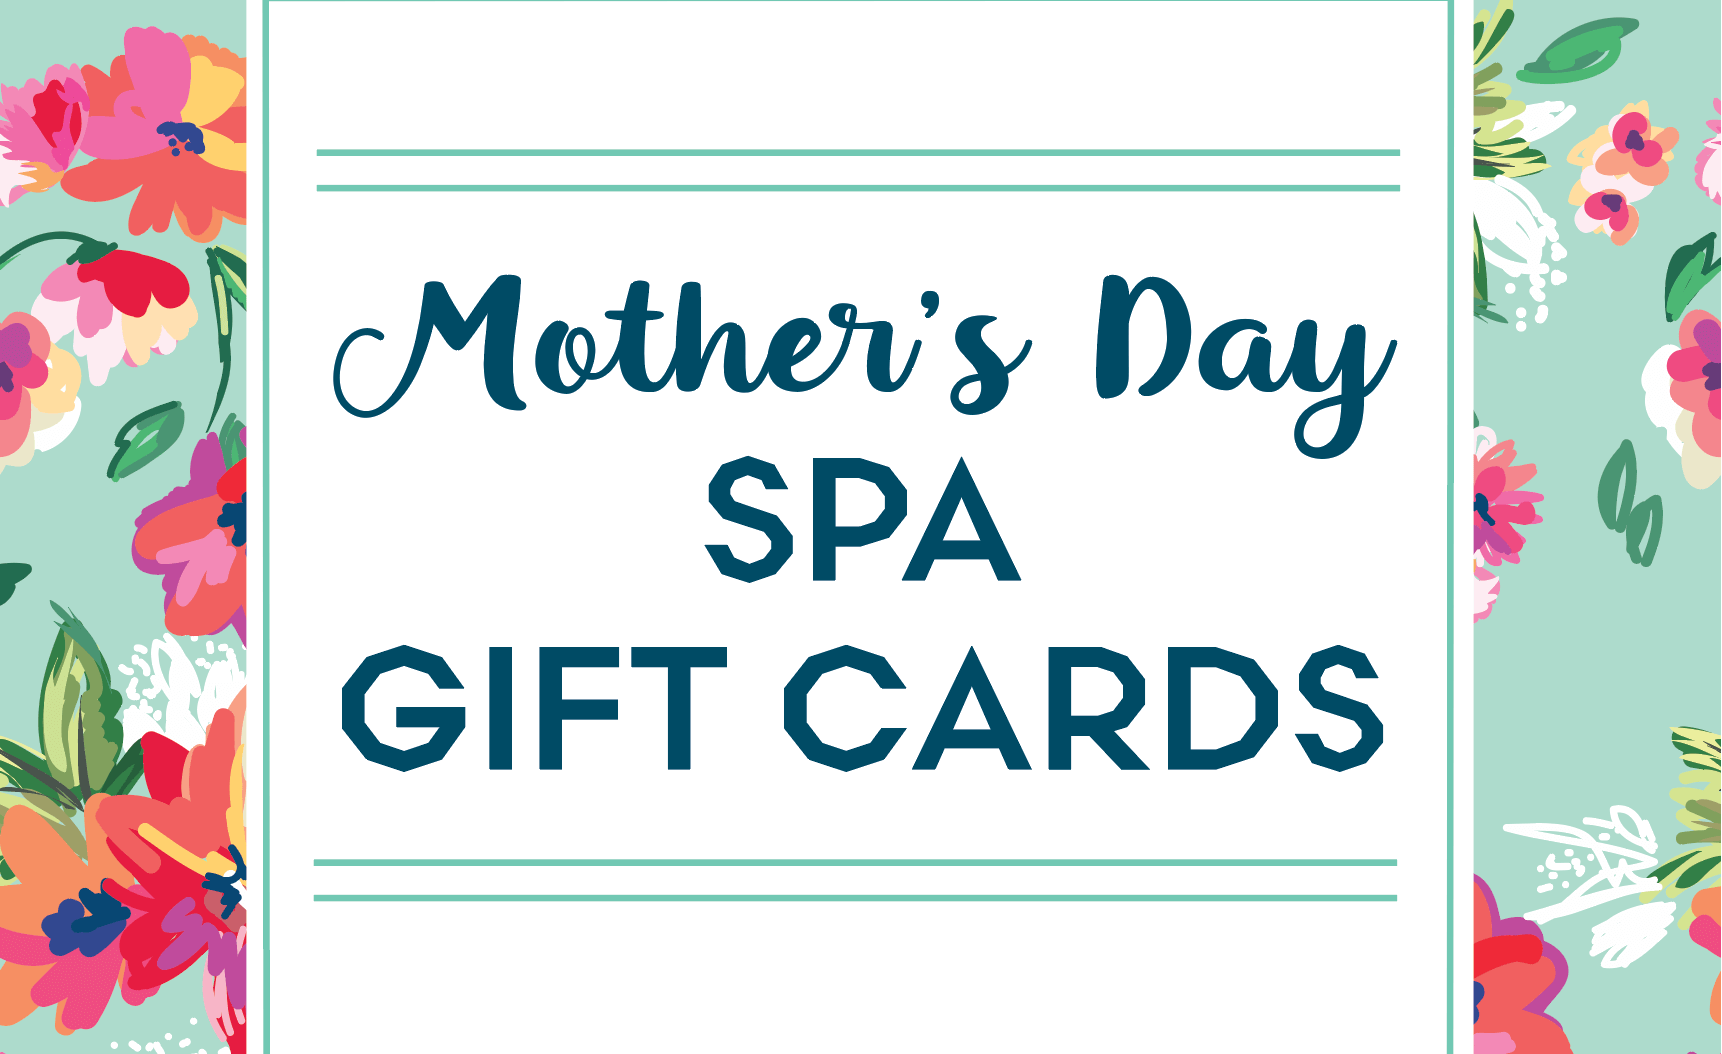 Mother’s Day Spa Gift Cards